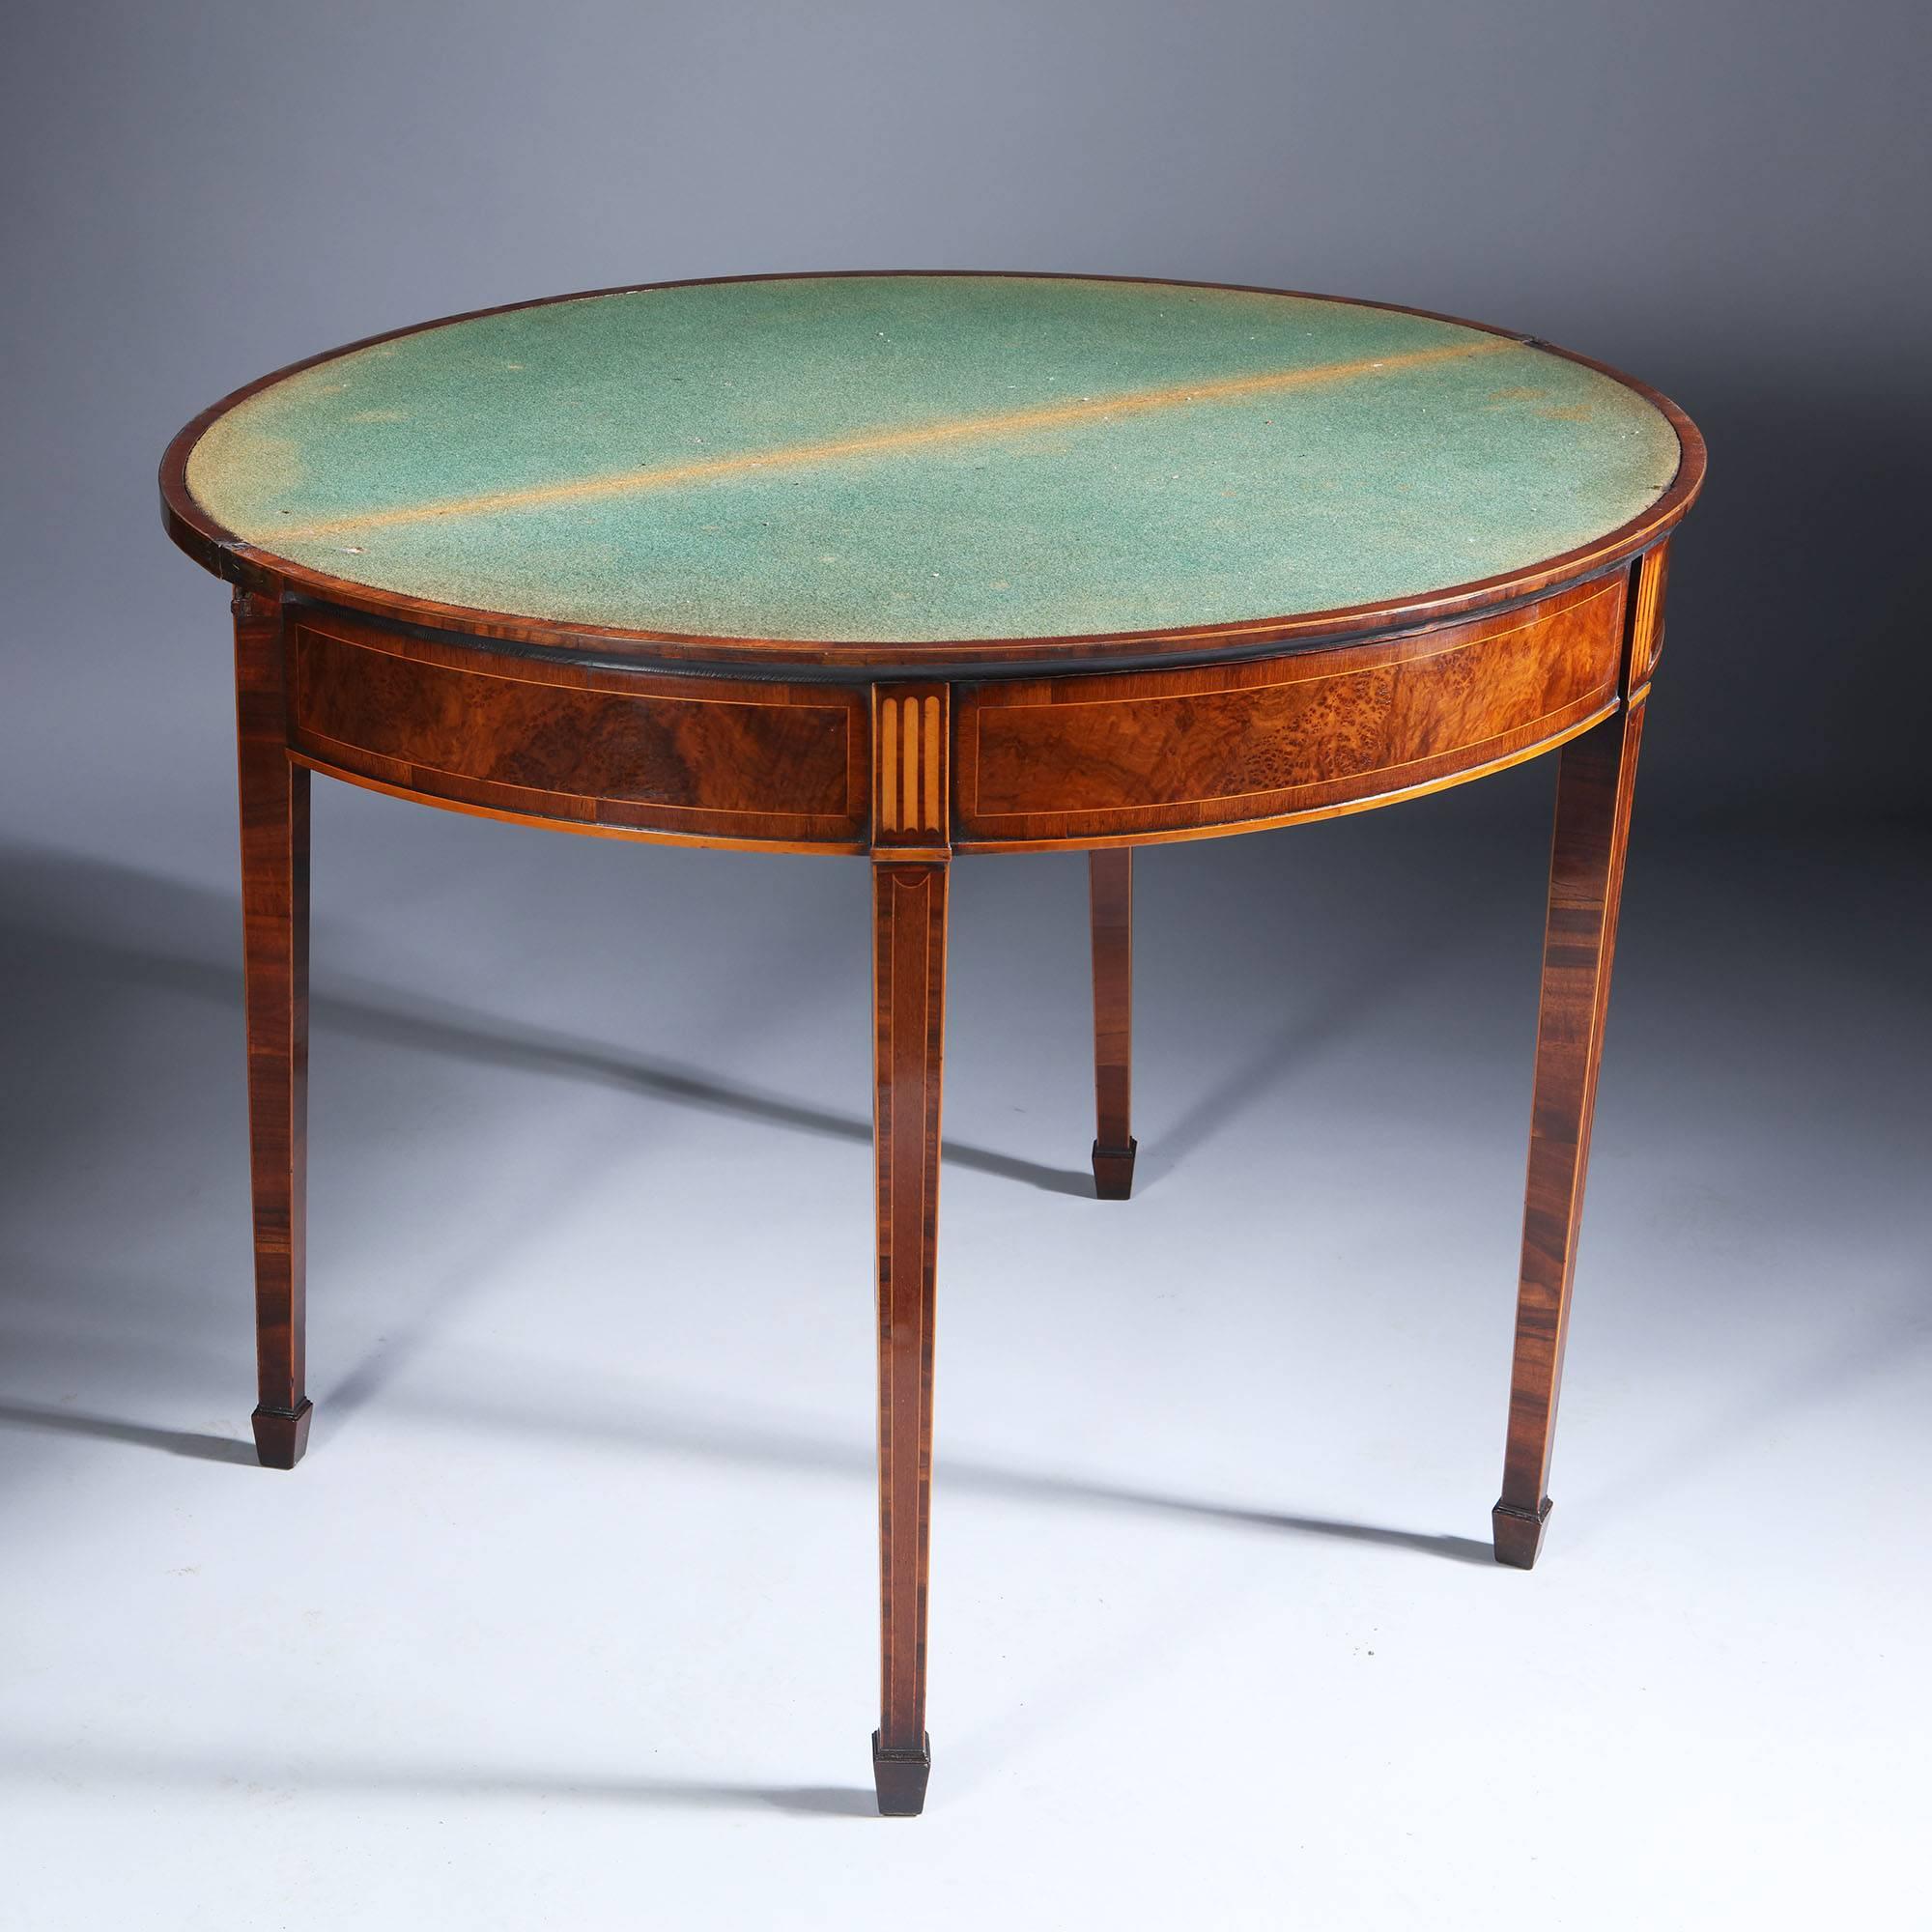 A fine quality George III inlaid mahogany demilune card table. The fold over top inlaid with a satinwood fan. The frieze has stringing around panels of amboyna and marquetry fluting at the top of the legs. The table is supported on square tapering